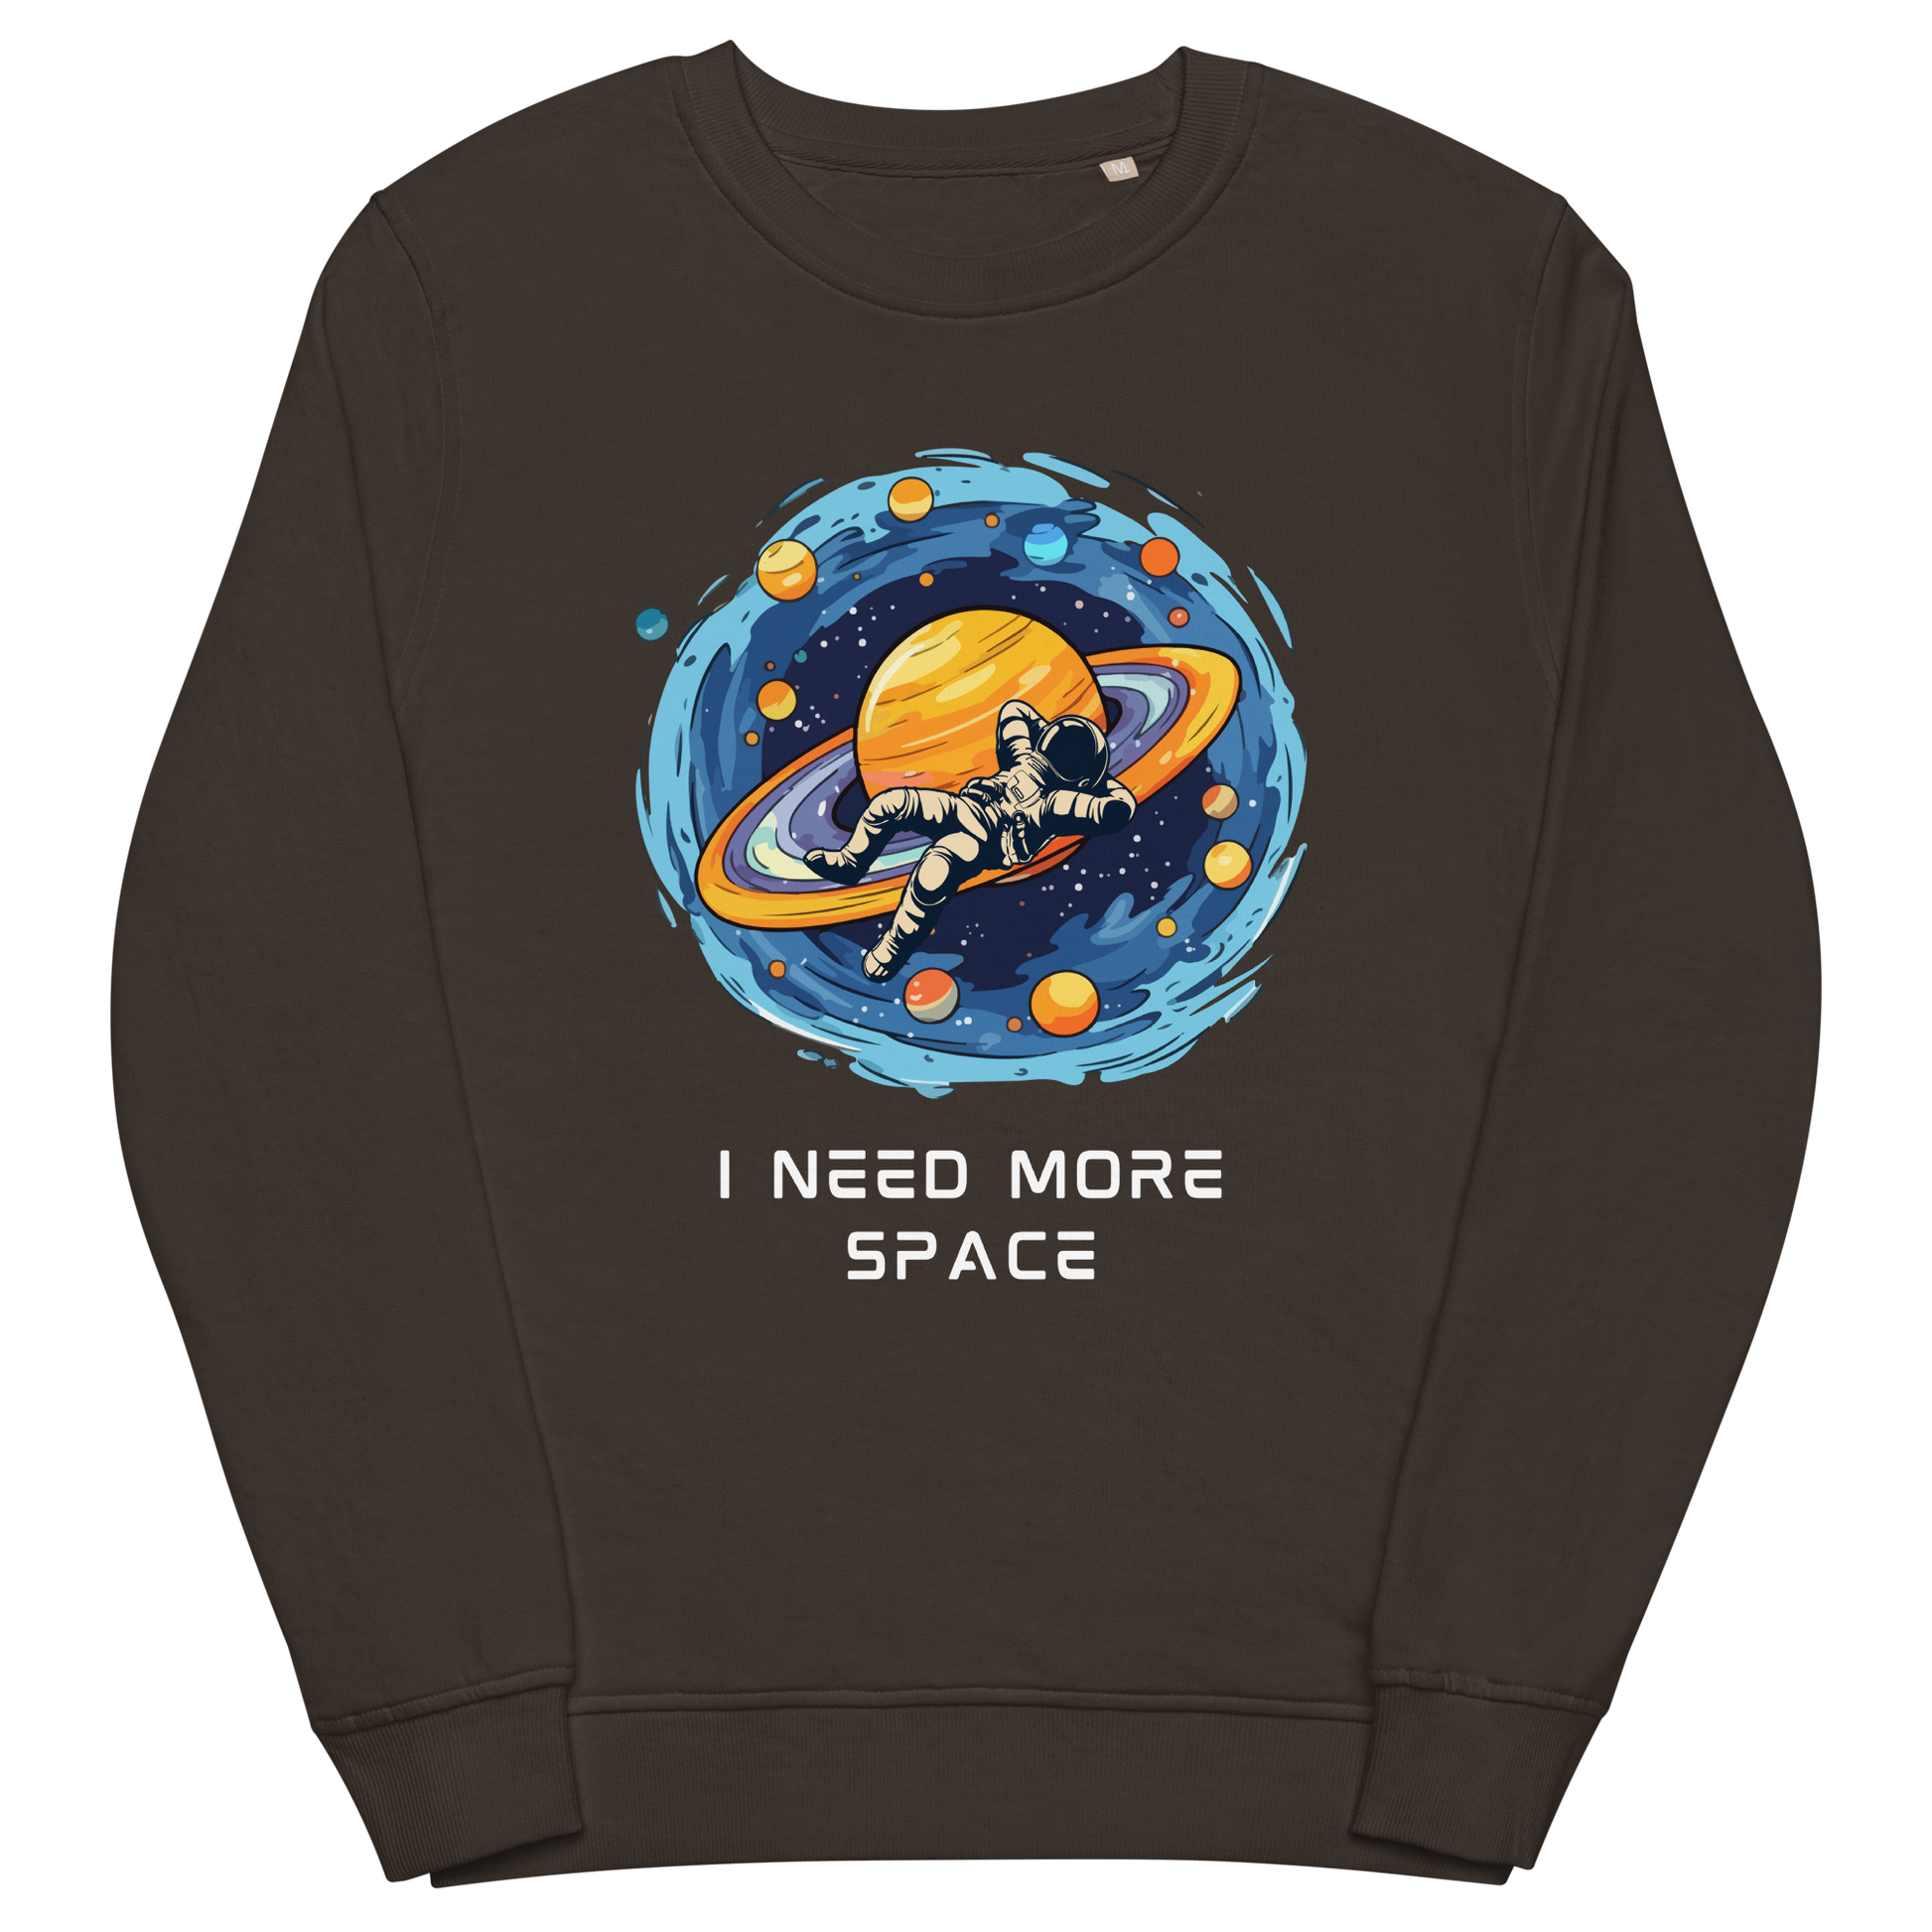 Deep Charcoal Grey Organic Cotton Astronaut Sweatshirt featuring a captivating I Need More Space graphic on the chest - Funny Graphic Space Sweatshirts - Boozy Fox